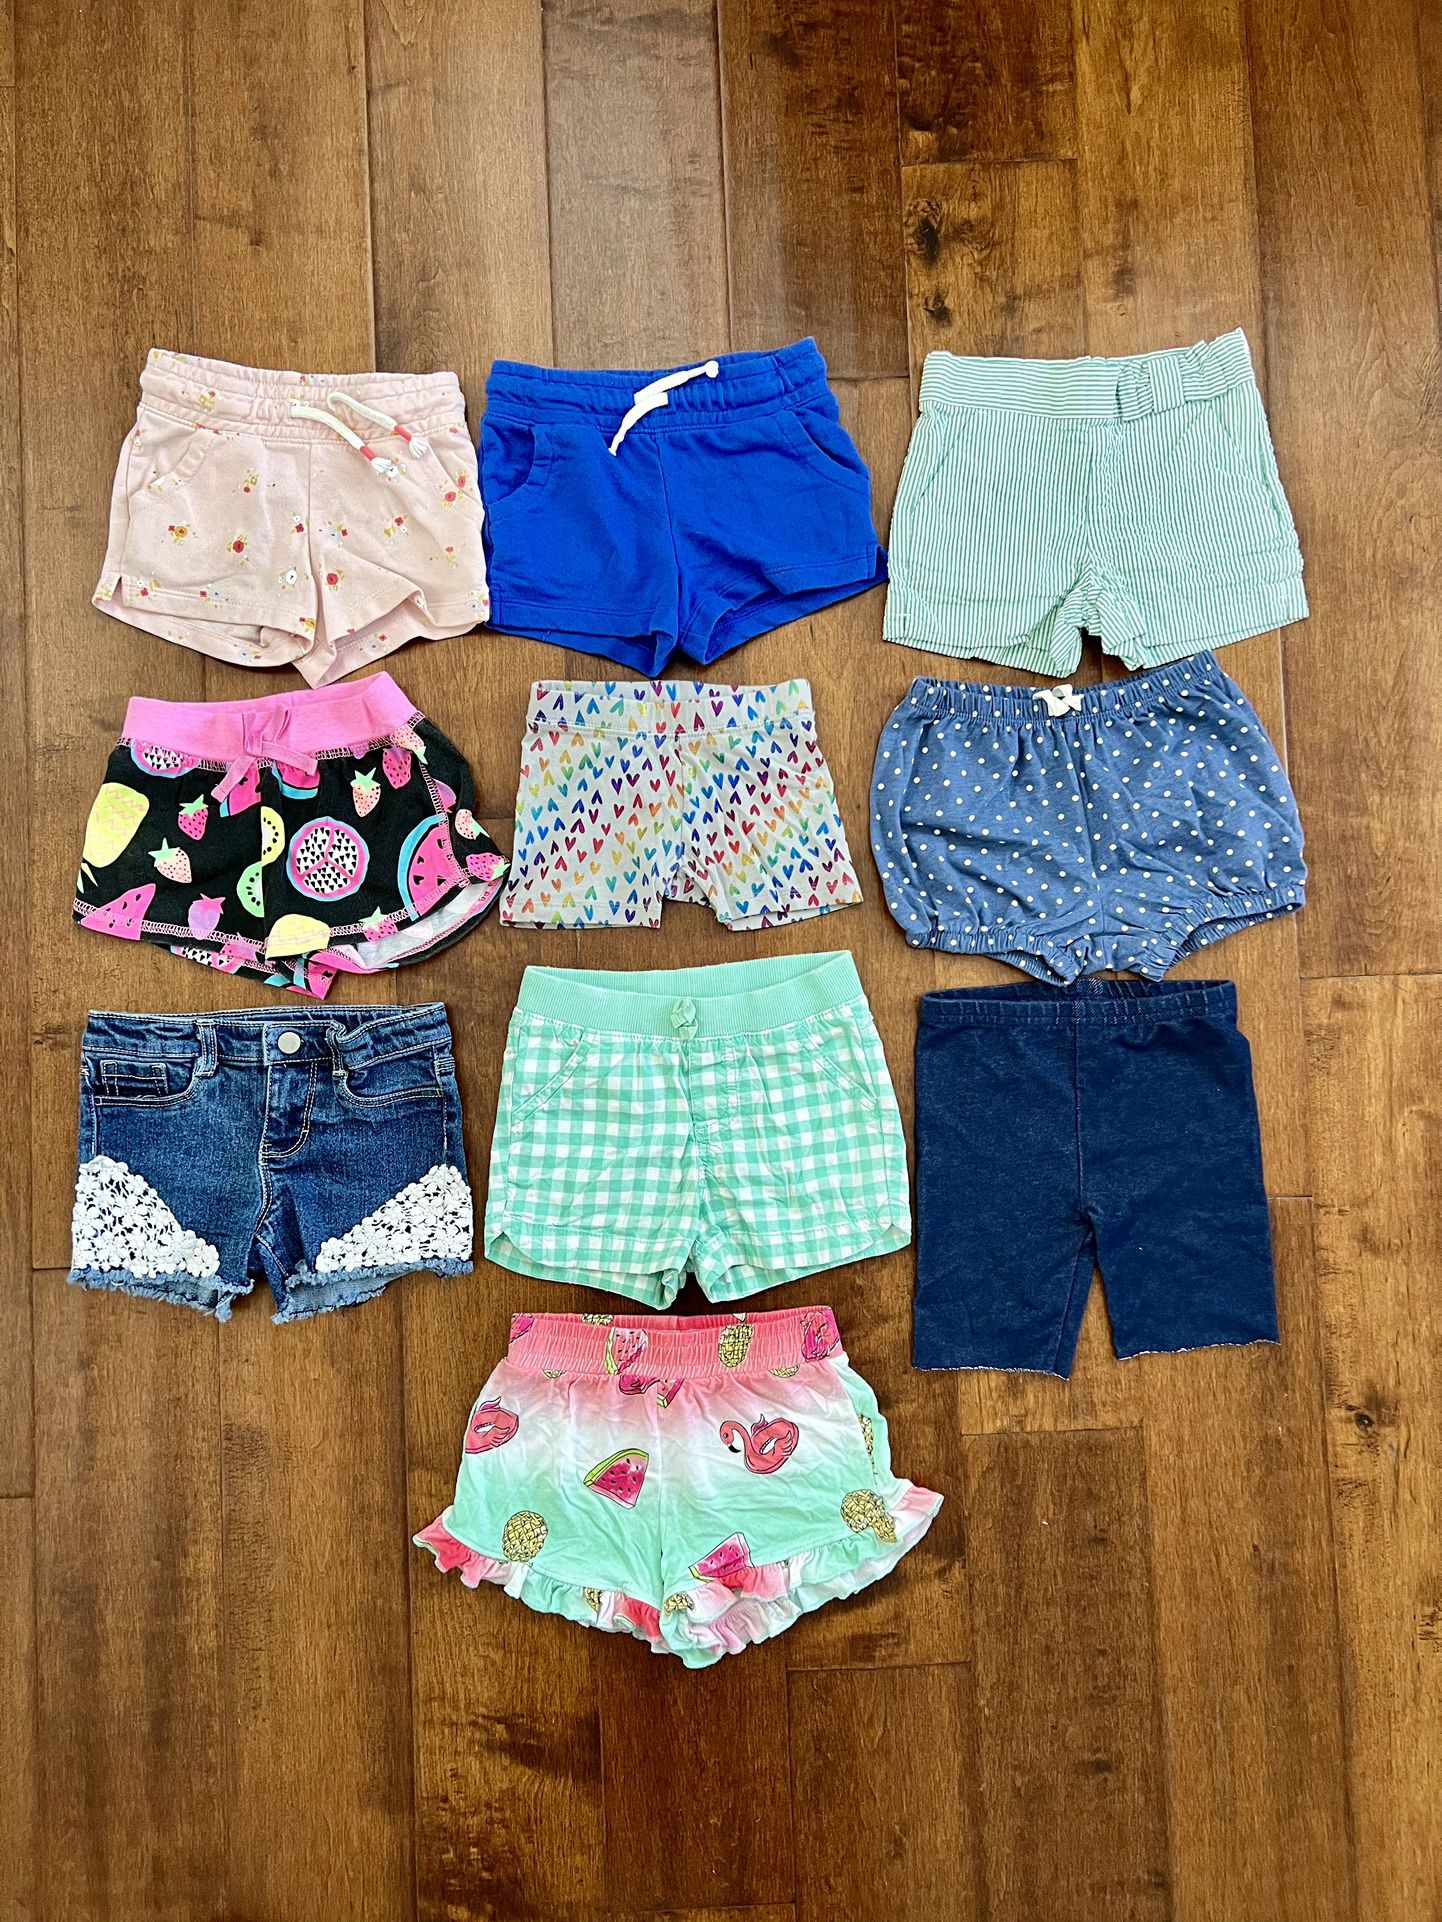 Toddler Girl Shorts lot bundle size 3T Janie & jack, baby gap   Lot of 10 pairs of shorts for toddler girl  Size 3T  In good condition (baby gap polka